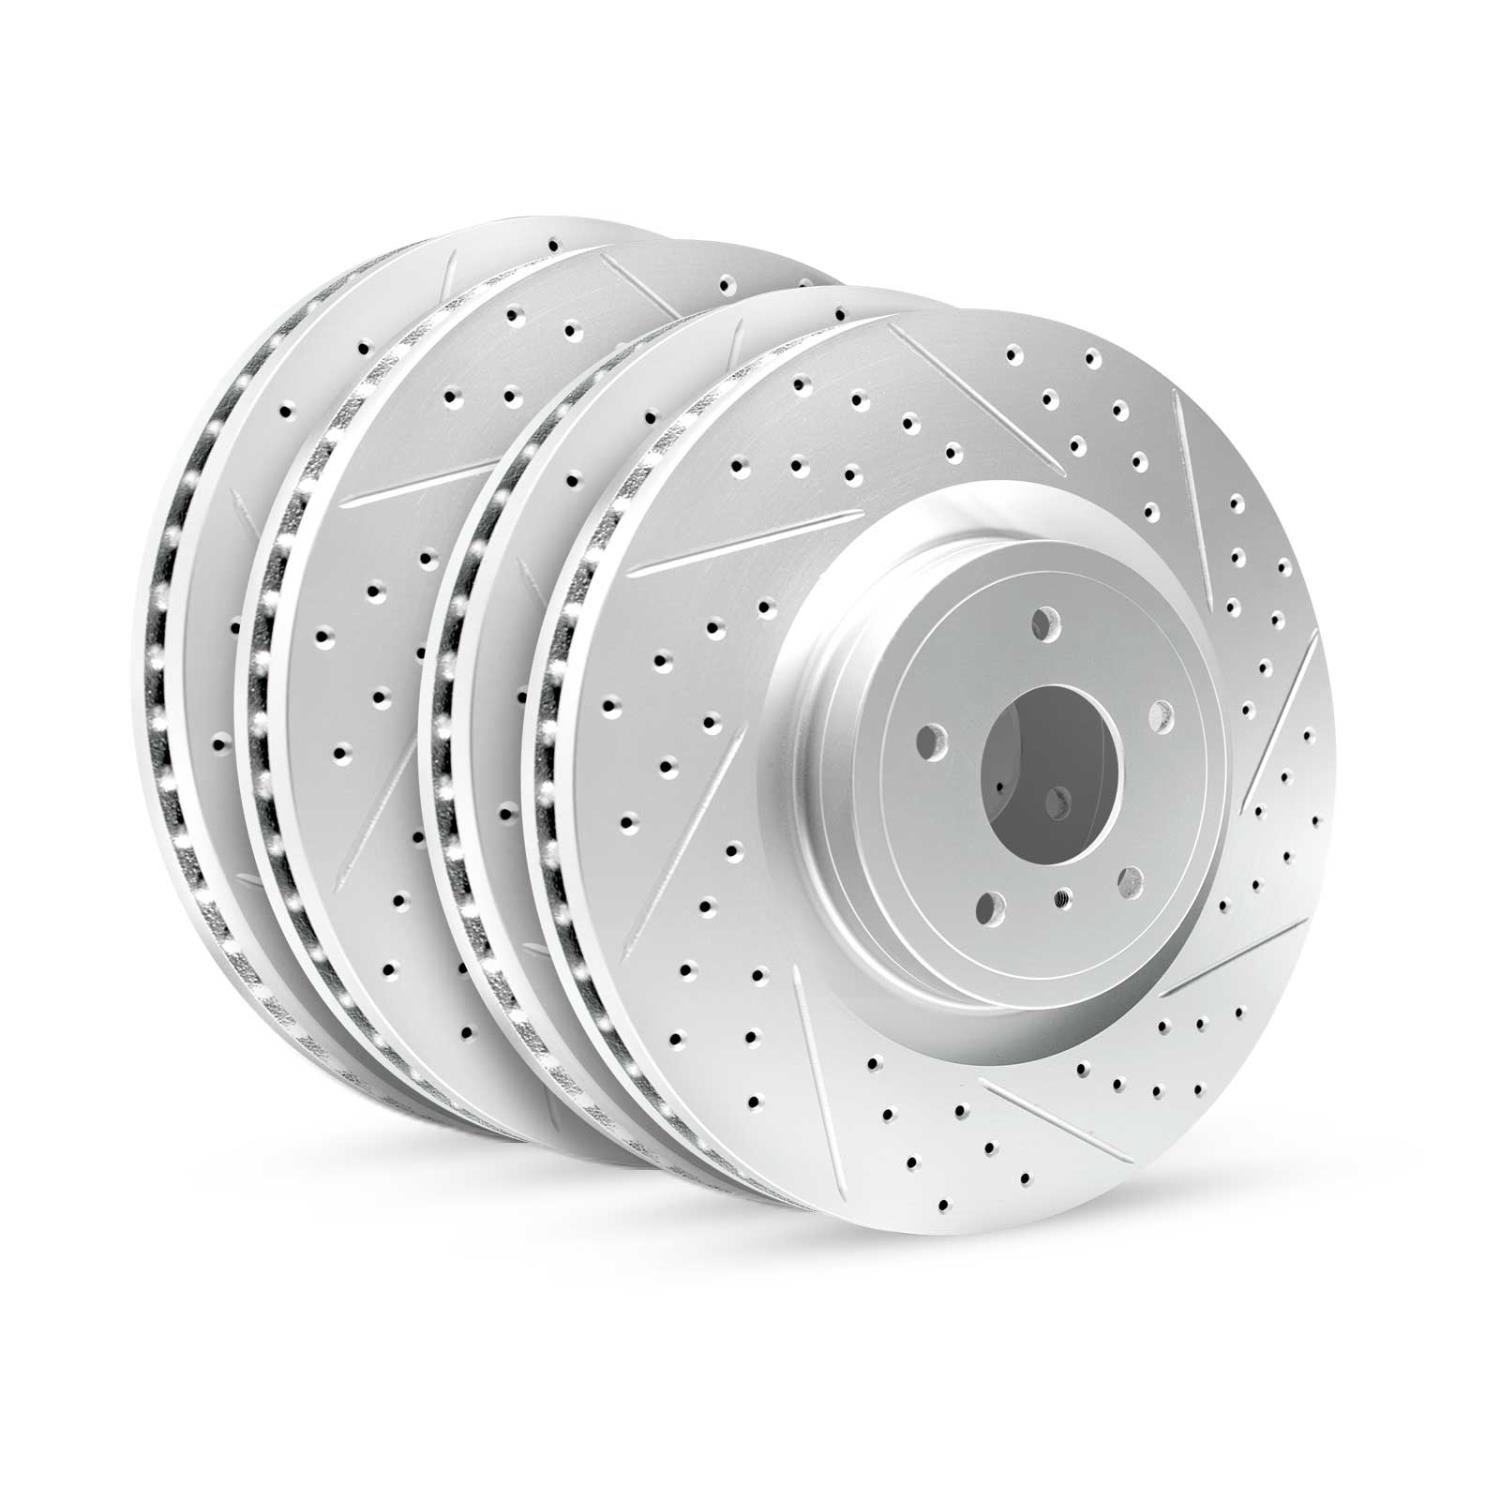 GEO-Carbon Drilled/Slotted Rotors, 2002-2006 Kia/Hyundai/Genesis, Position: Front/Rear